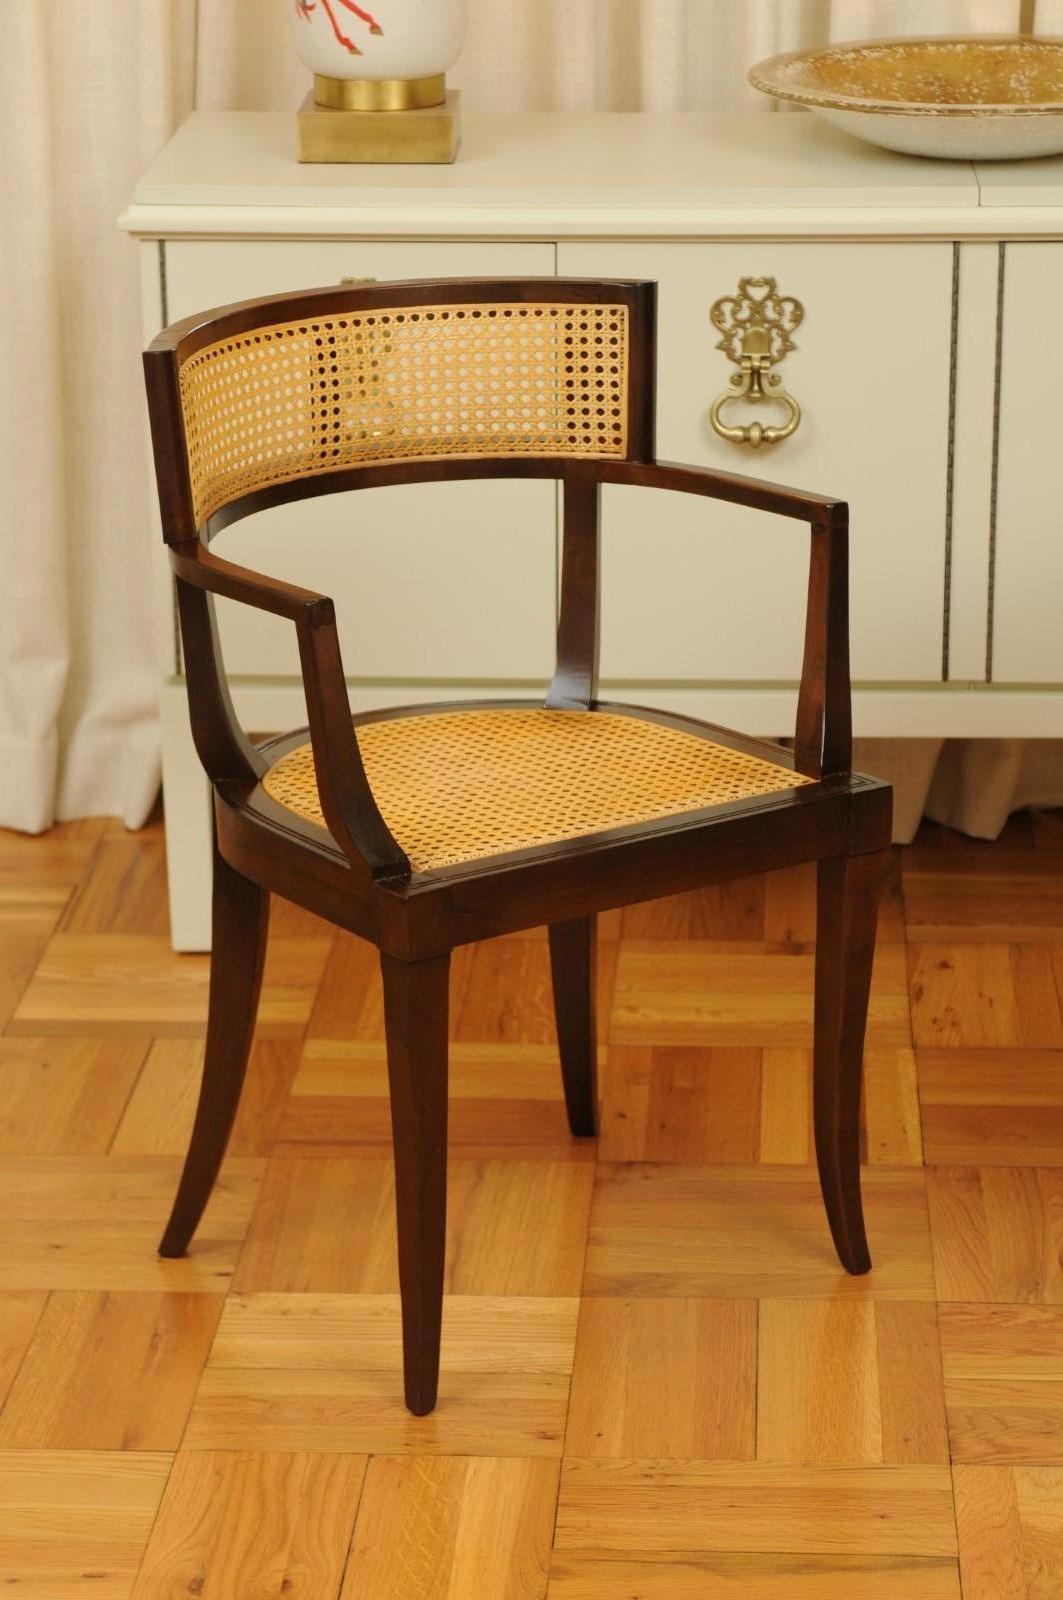 Exquisite Set of 12 Klismos Cane Dining Chairs by Baker, circa 1958, Cane Seats In Excellent Condition For Sale In Atlanta, GA